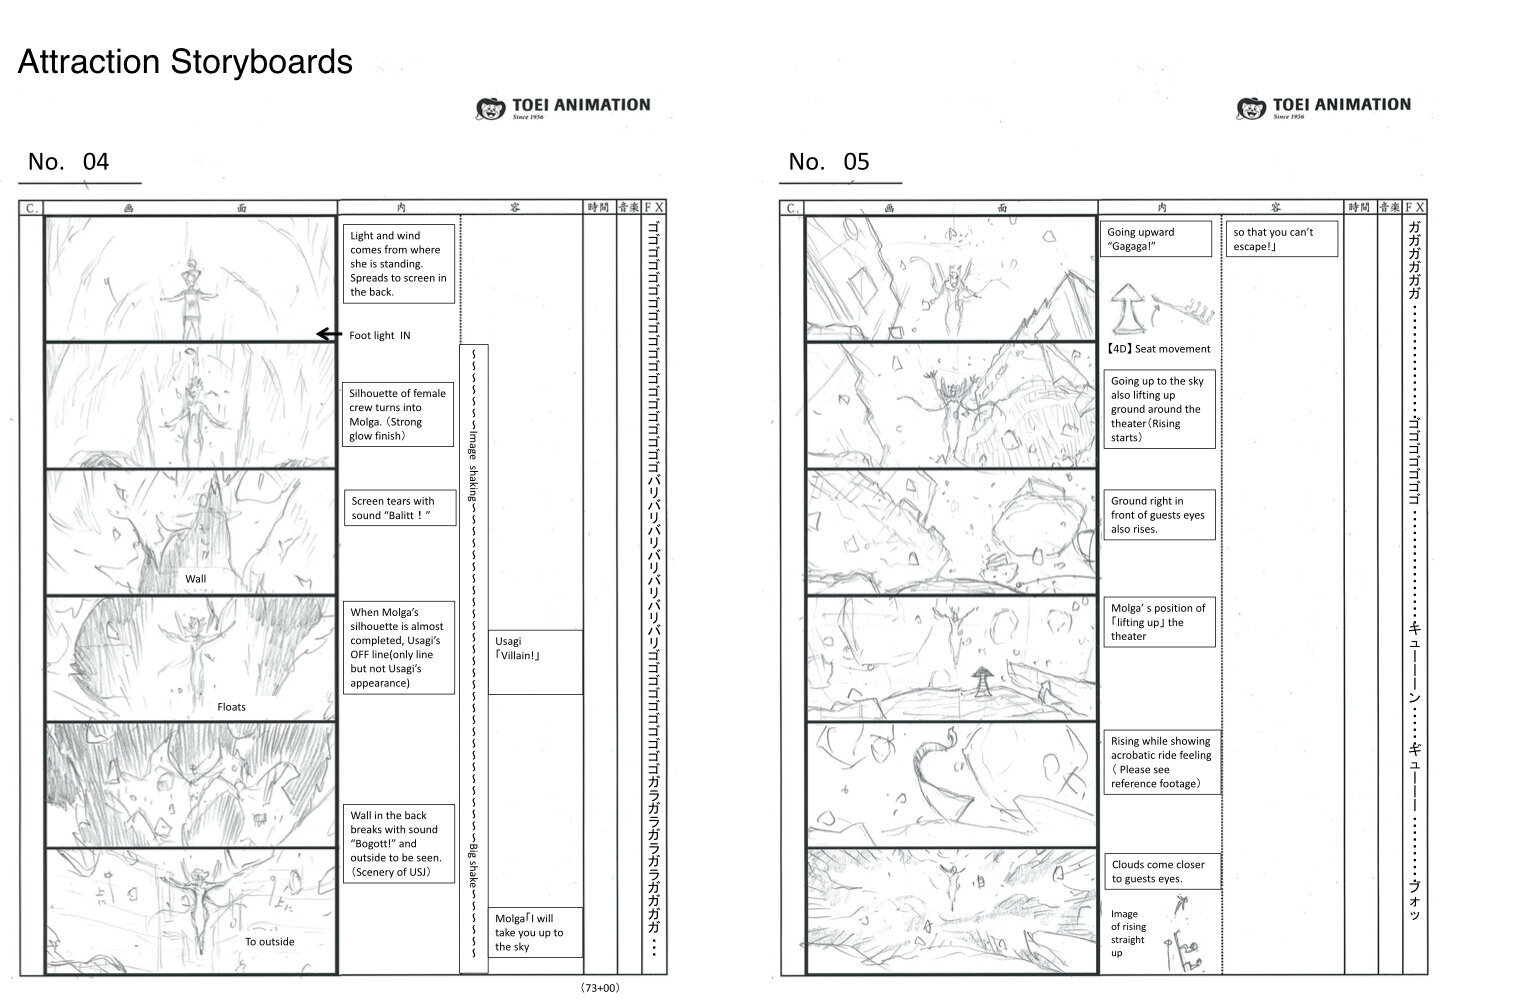  Art direction and visual story development for the main show  Storyboards by Toei Animation  